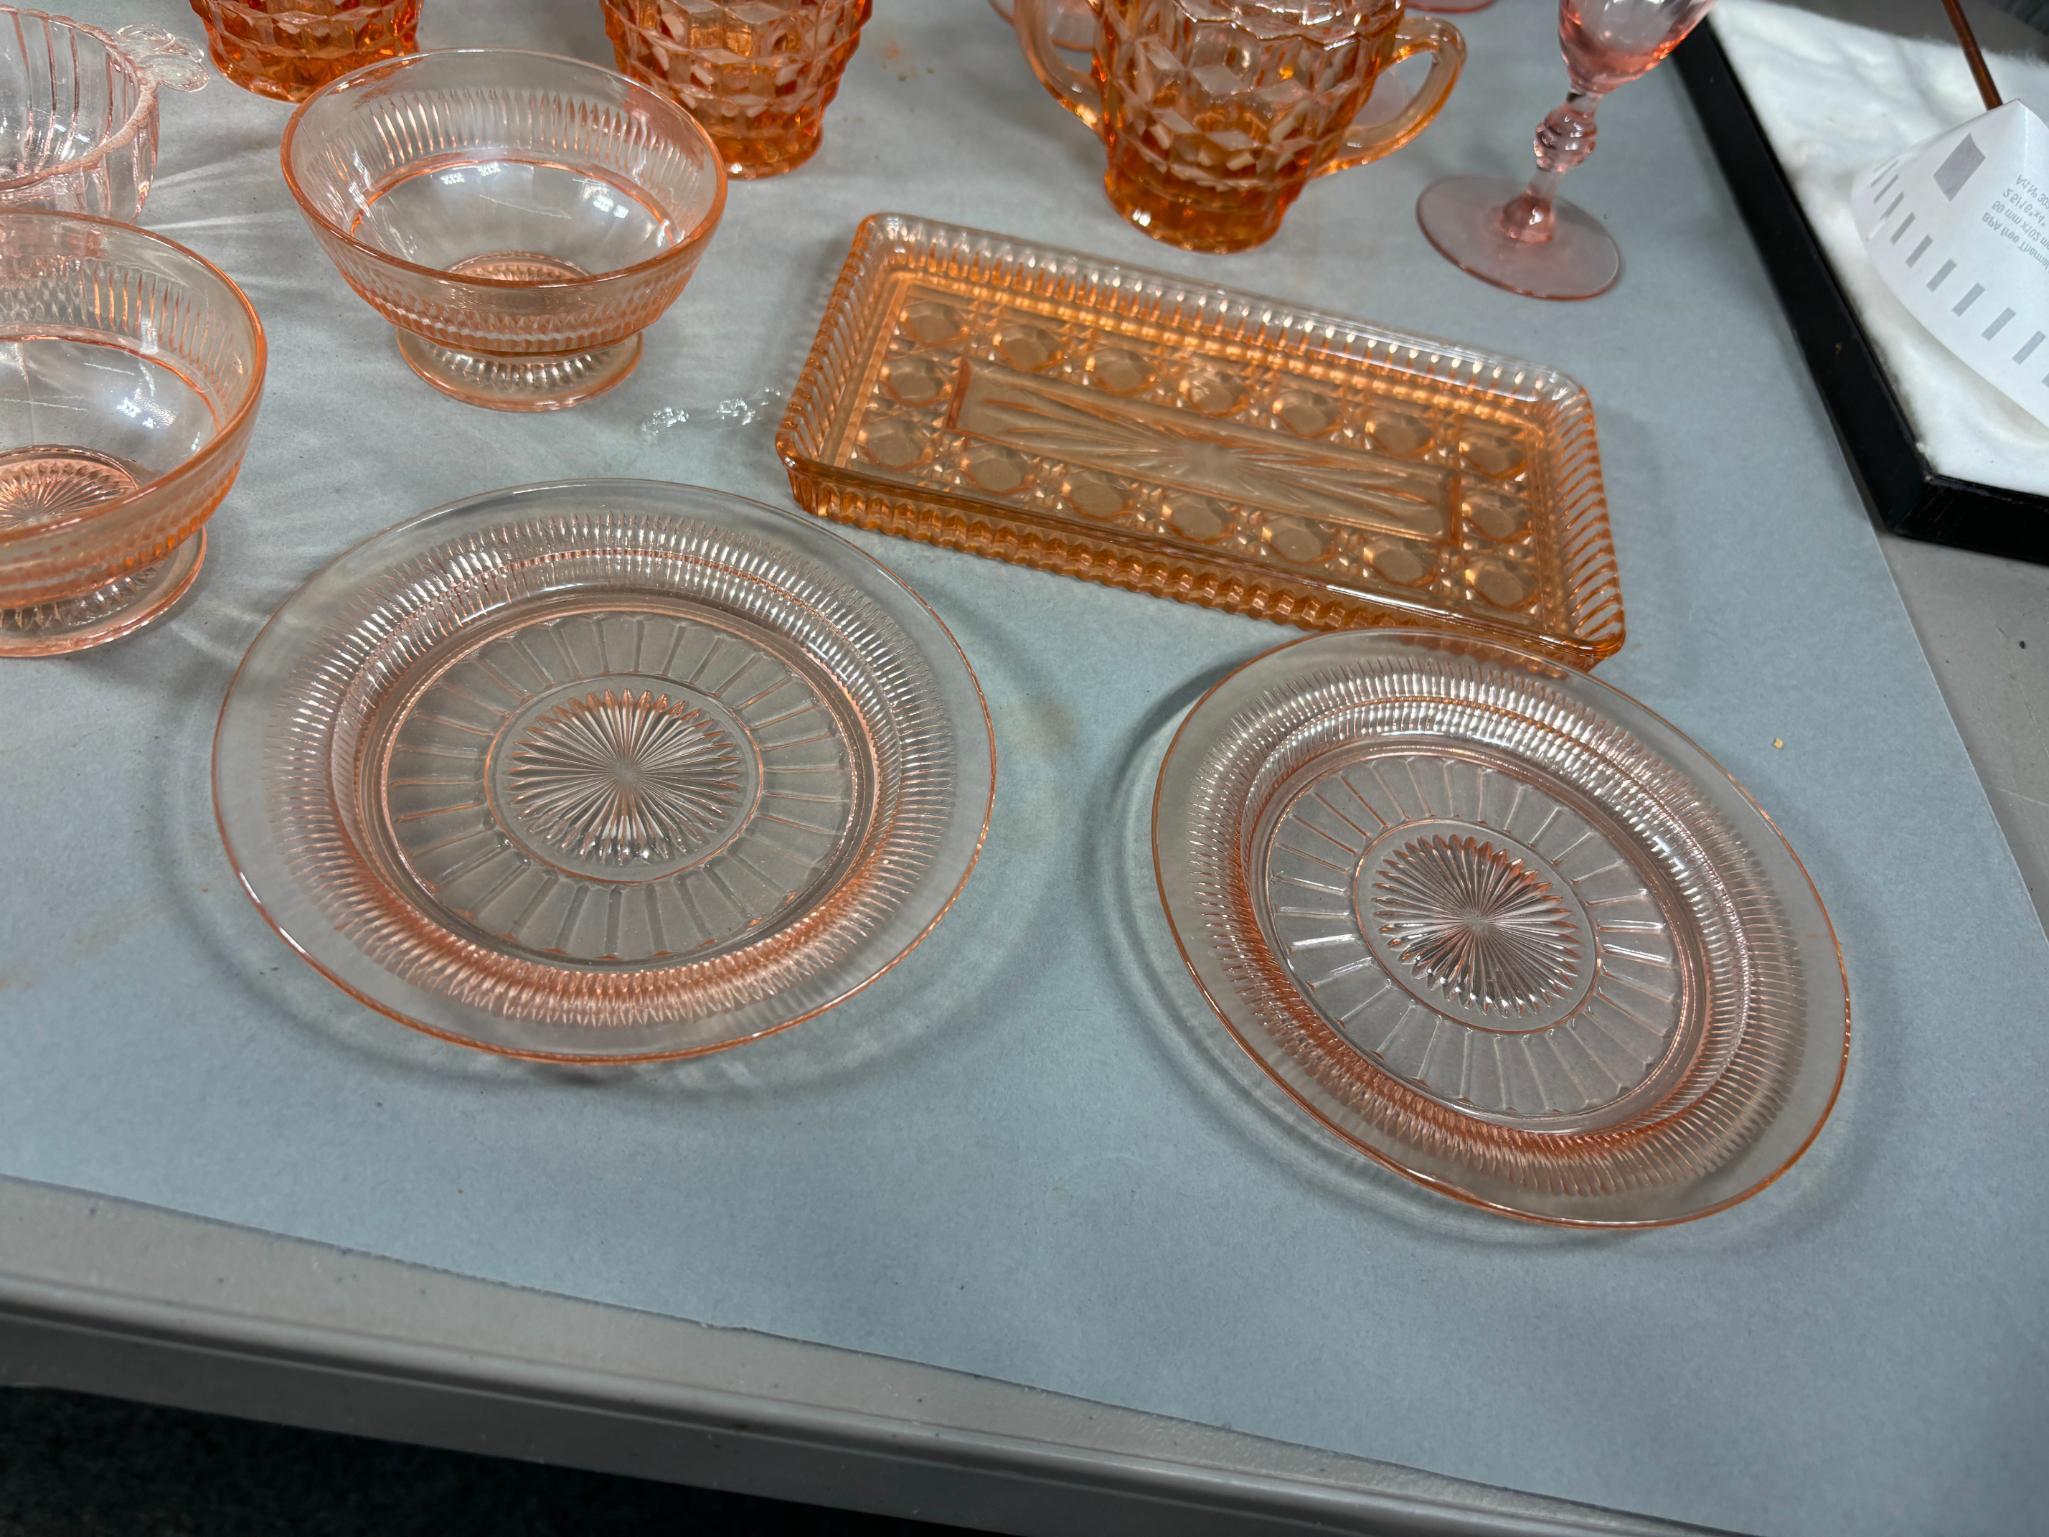 Large Lot of Assorted Pink Depression Glass